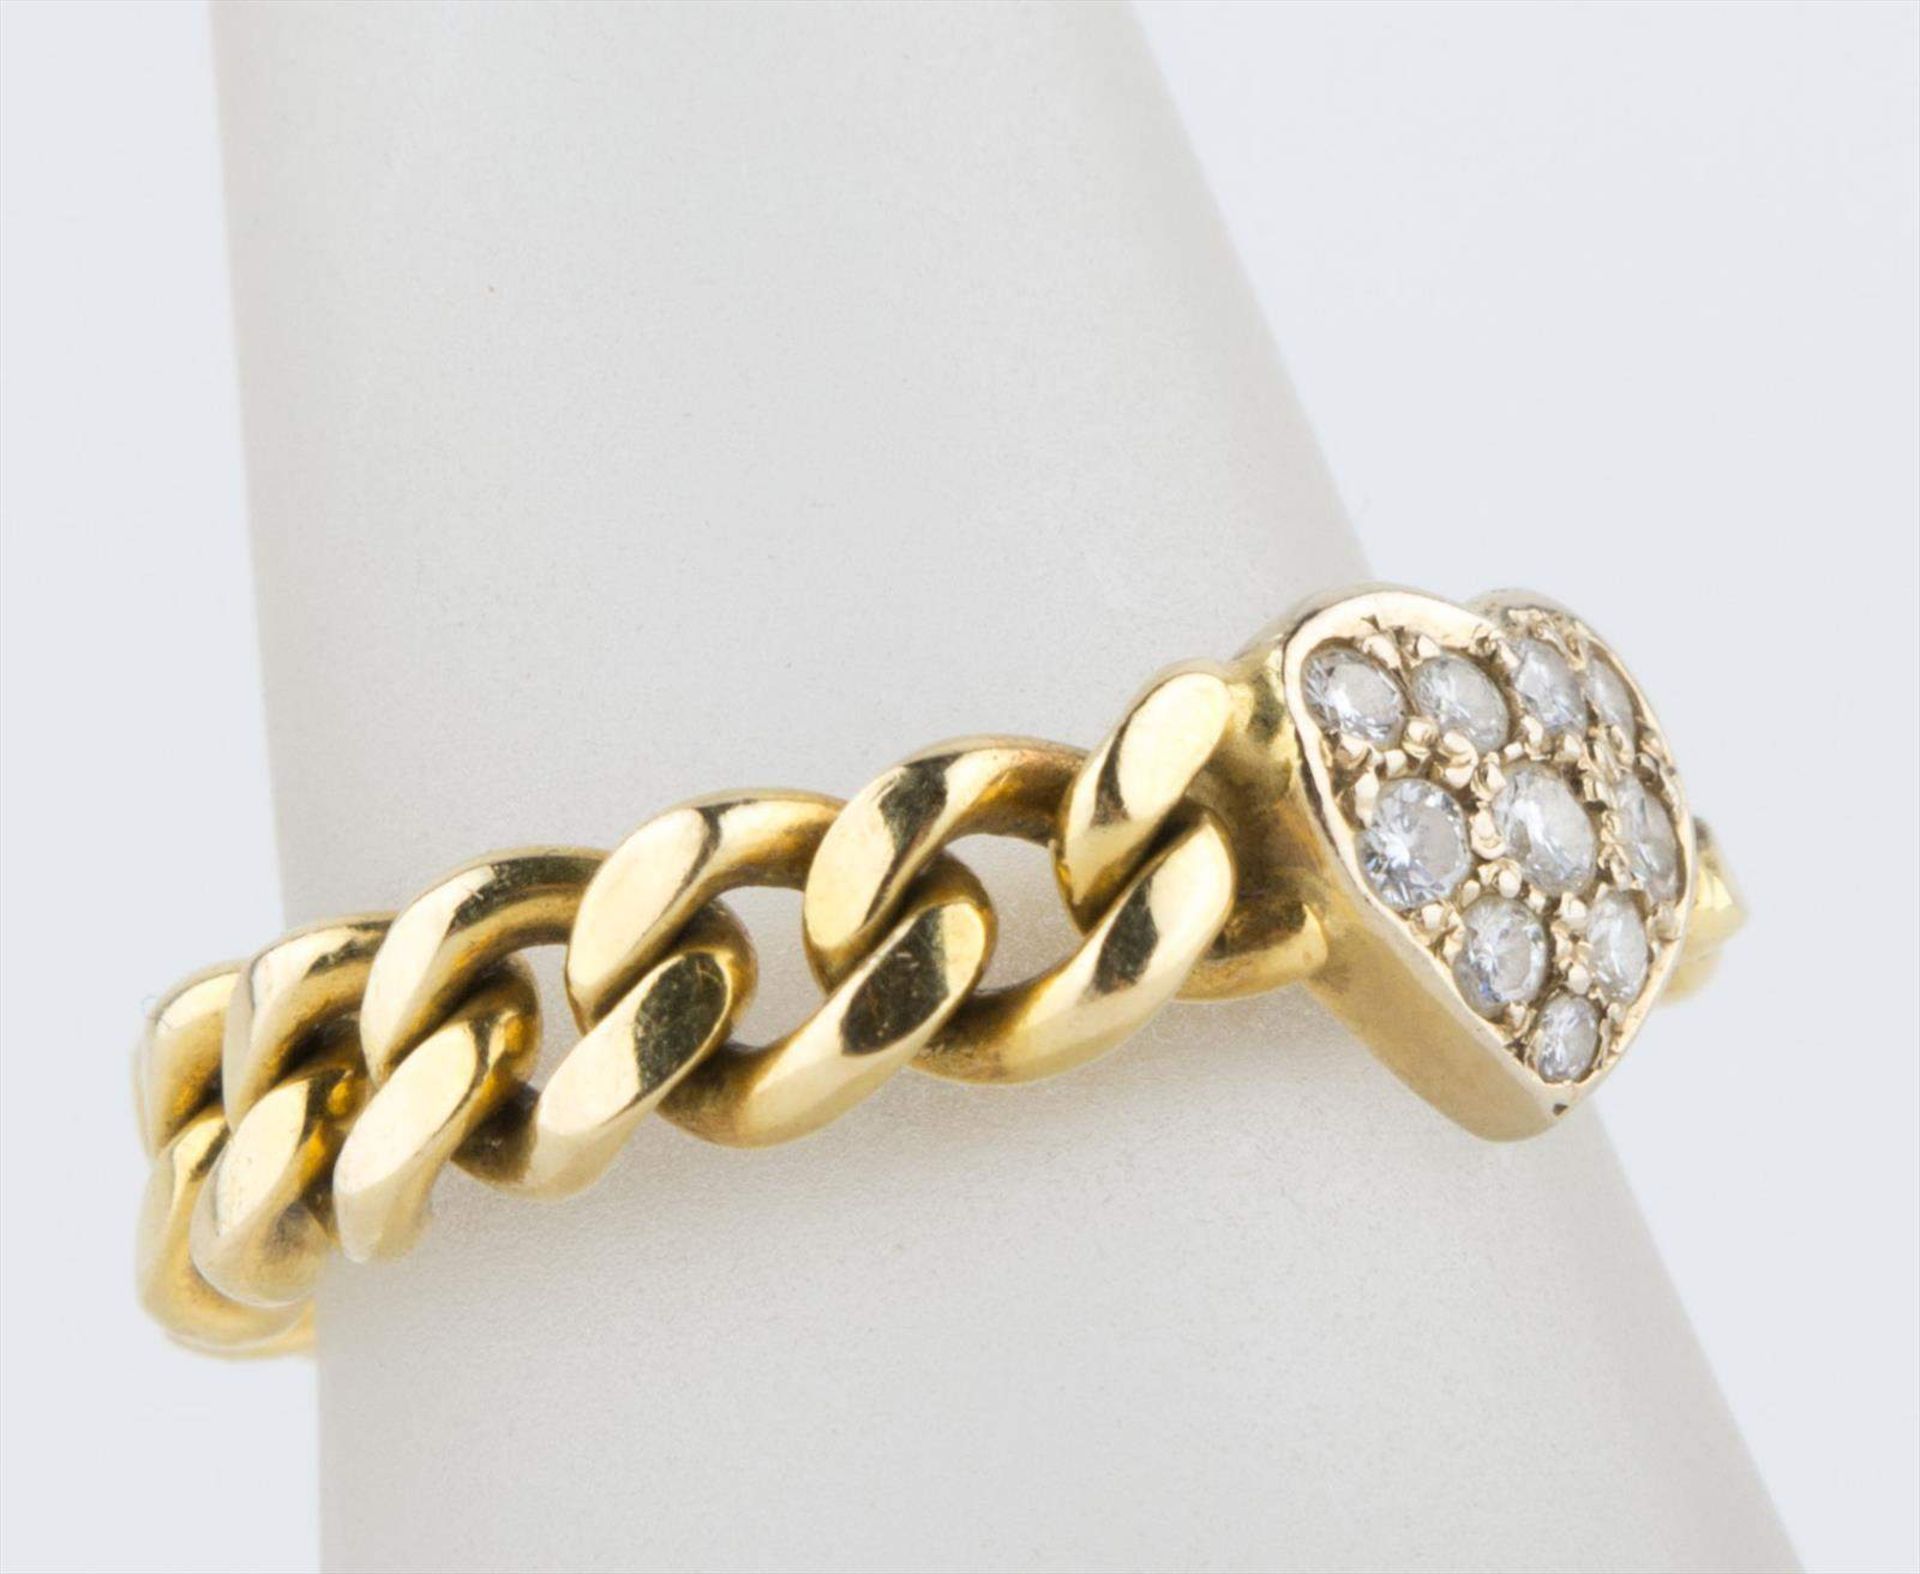 Damenkettenring / Woman´s necklace ring750 GG, mit Brilliantherz, 5,9 g. /
750 yellow gold, with